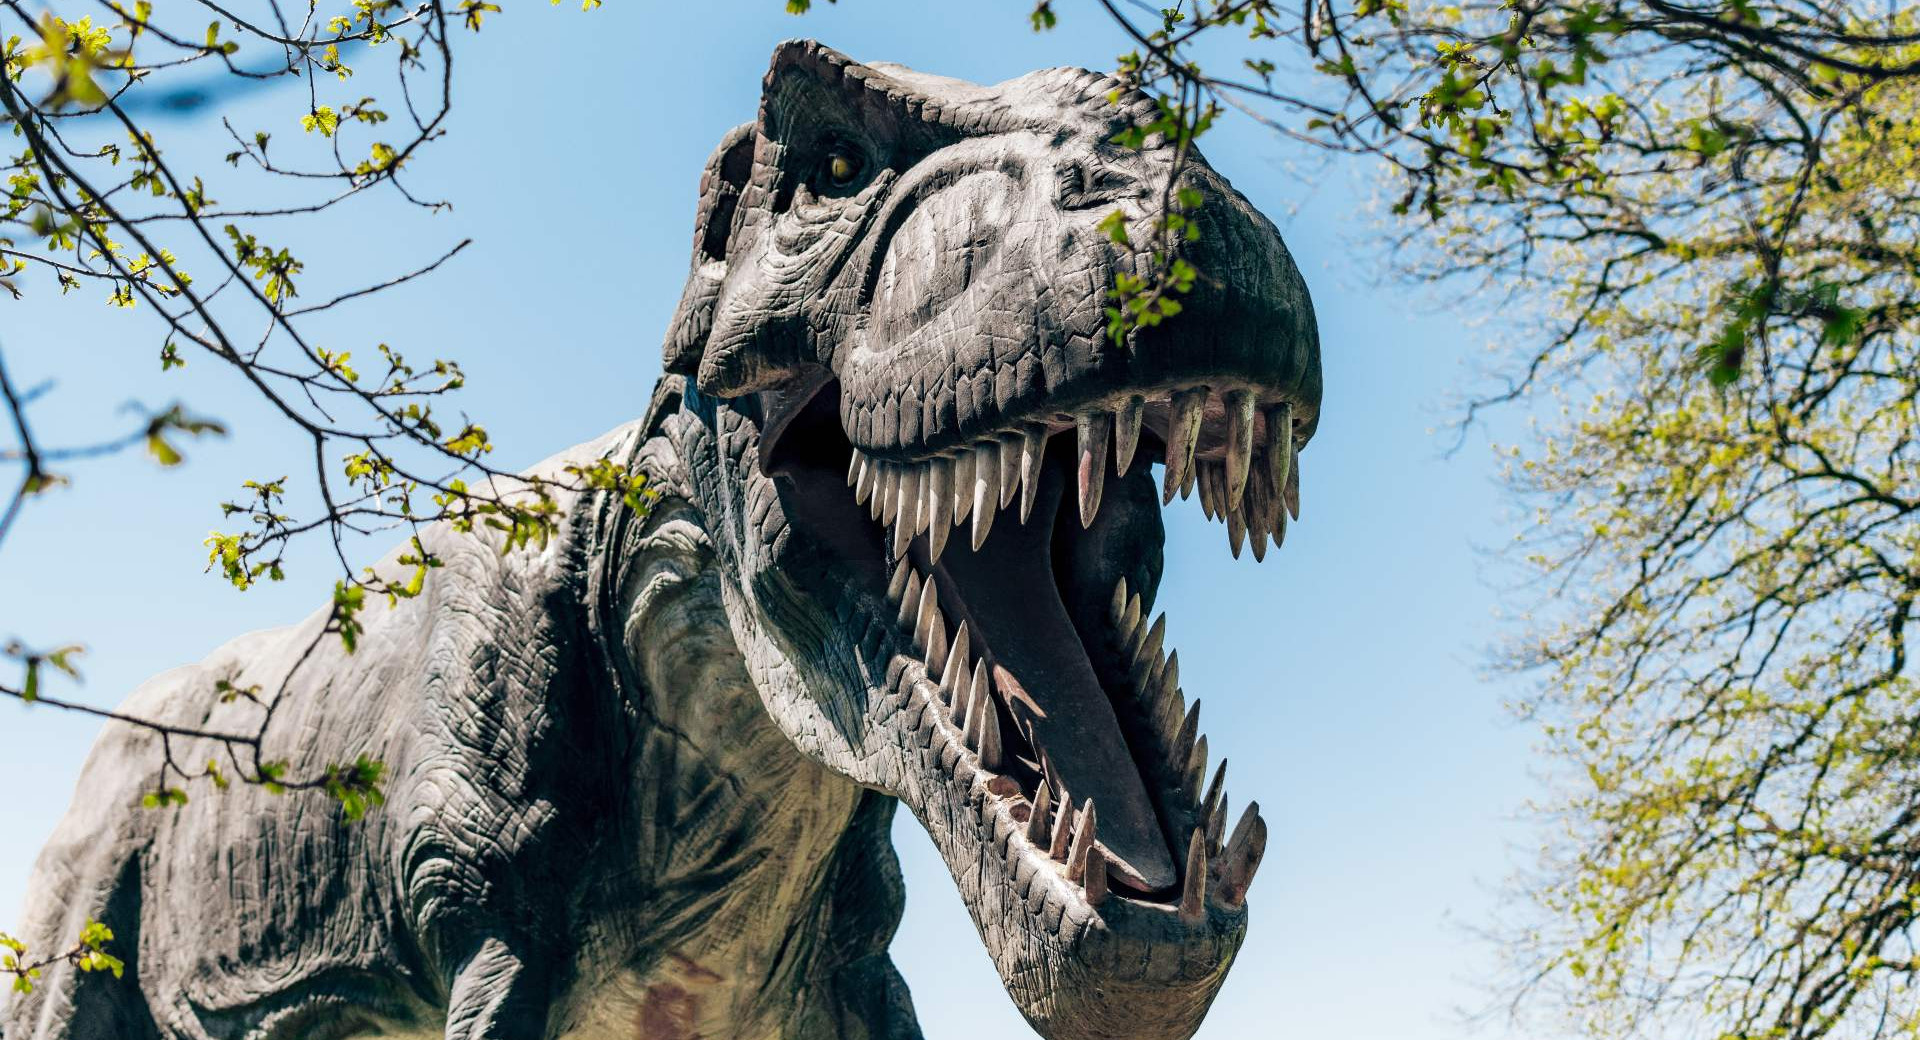 t-rex model surrounded by branches